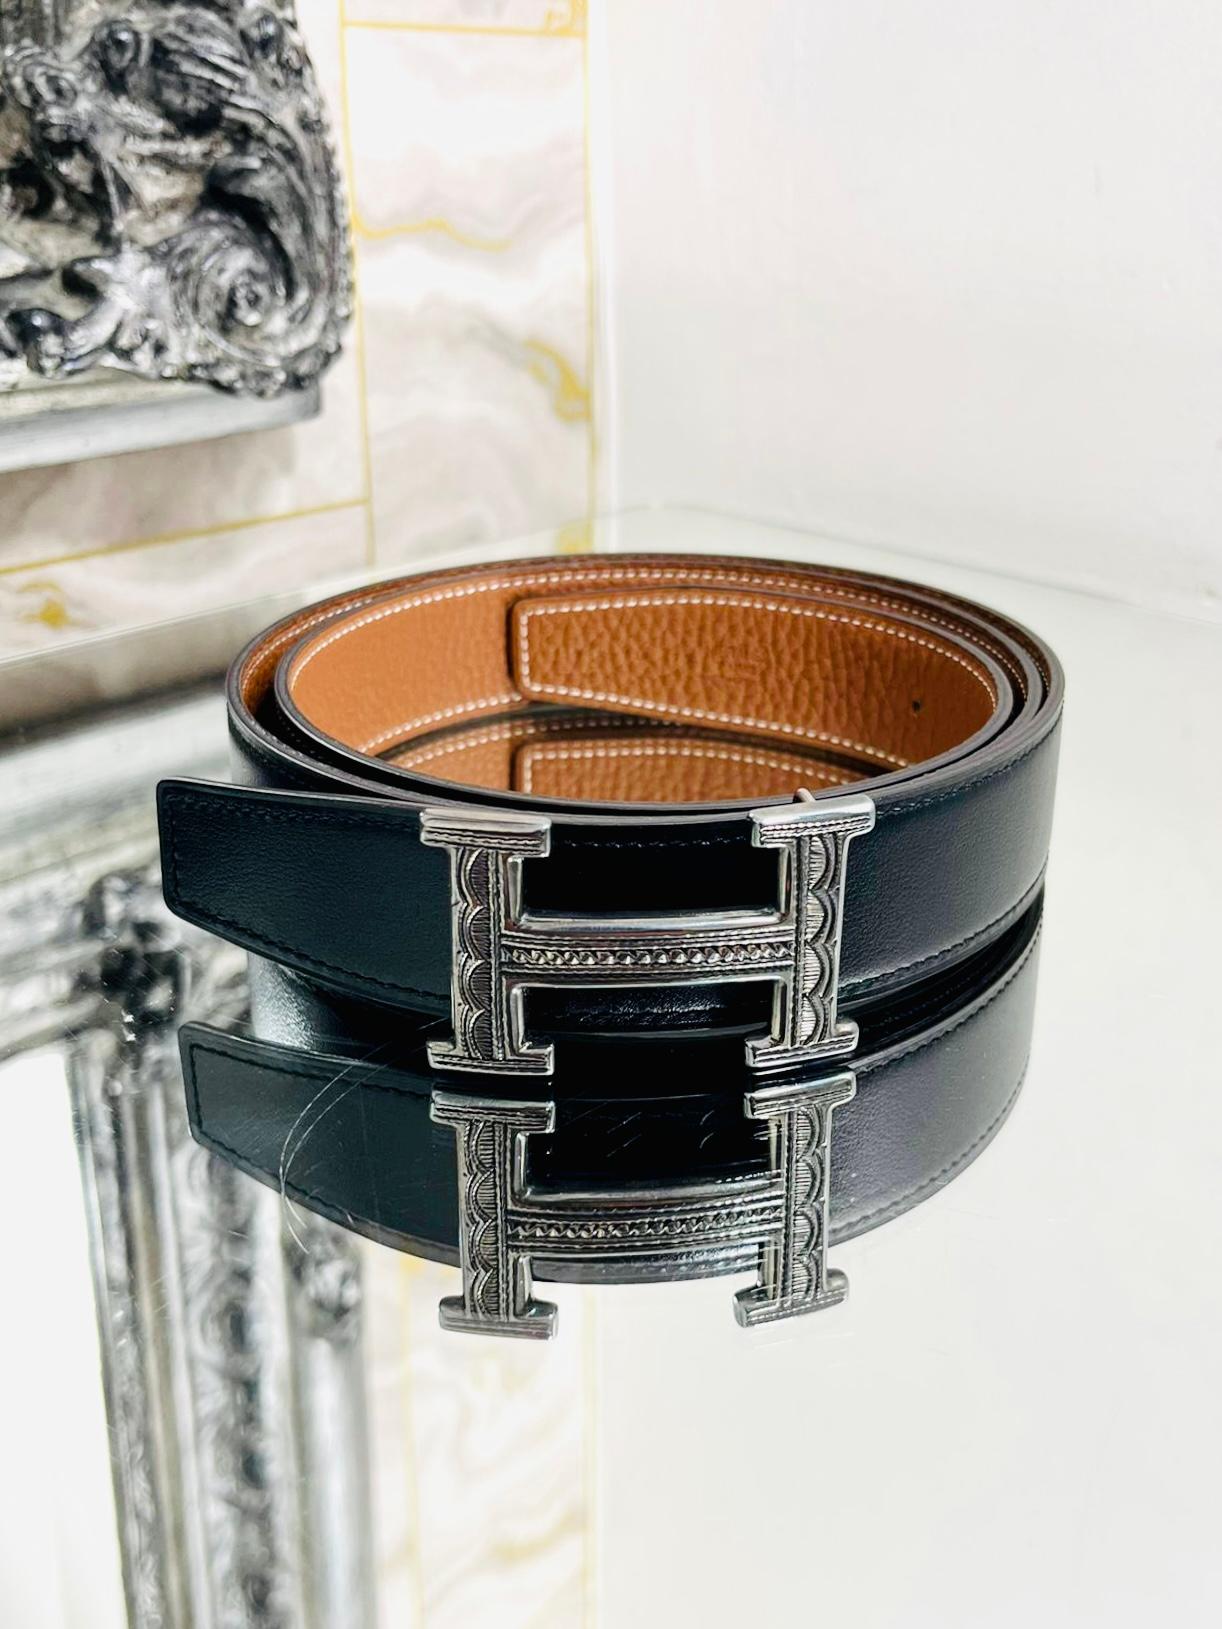 Brand New - Hermes Sterling Silver Touareg Buckle & Leather Belt Set

Solid 925 silver, blackened, engraved buckle with black and 

brown, reversible leather belt.

The Toureg collection each buckle is intricately, hand carved with designed by